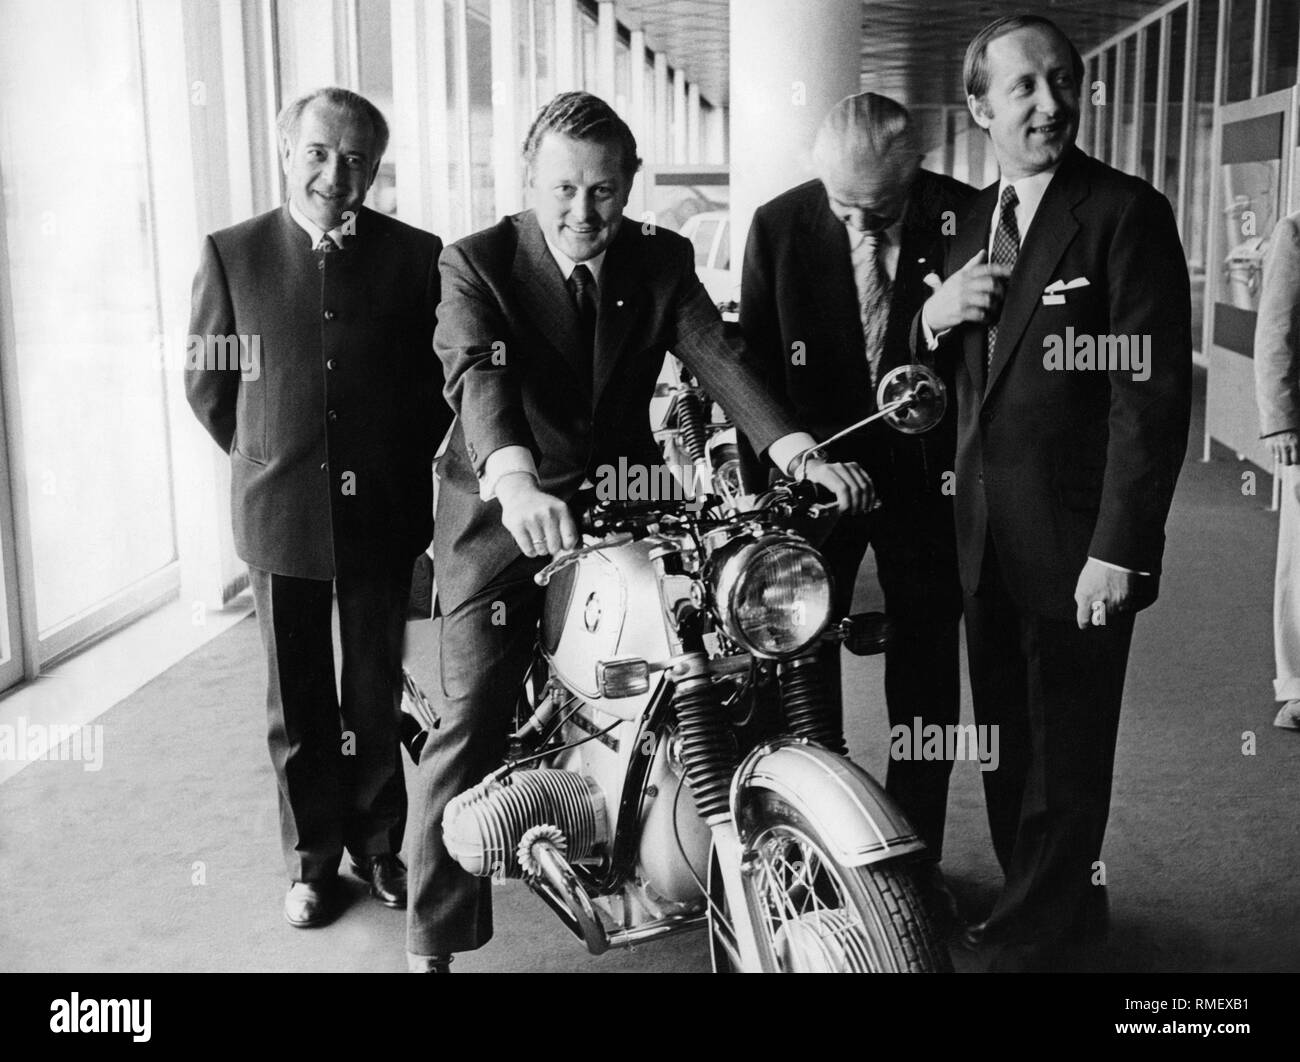 Herbert Quandt (2nd from right) with Bavarian Environment Minister Max Streibl, State Secretary Franz Sackmann (l.) and BMW CEO Eberhard von Kuenheim (r.) at the inauguration of the BMW Administration Tower on Petuelring in Munich. Streibl sits on a BMW motorcycle of the model R 75/5. Stock Photo